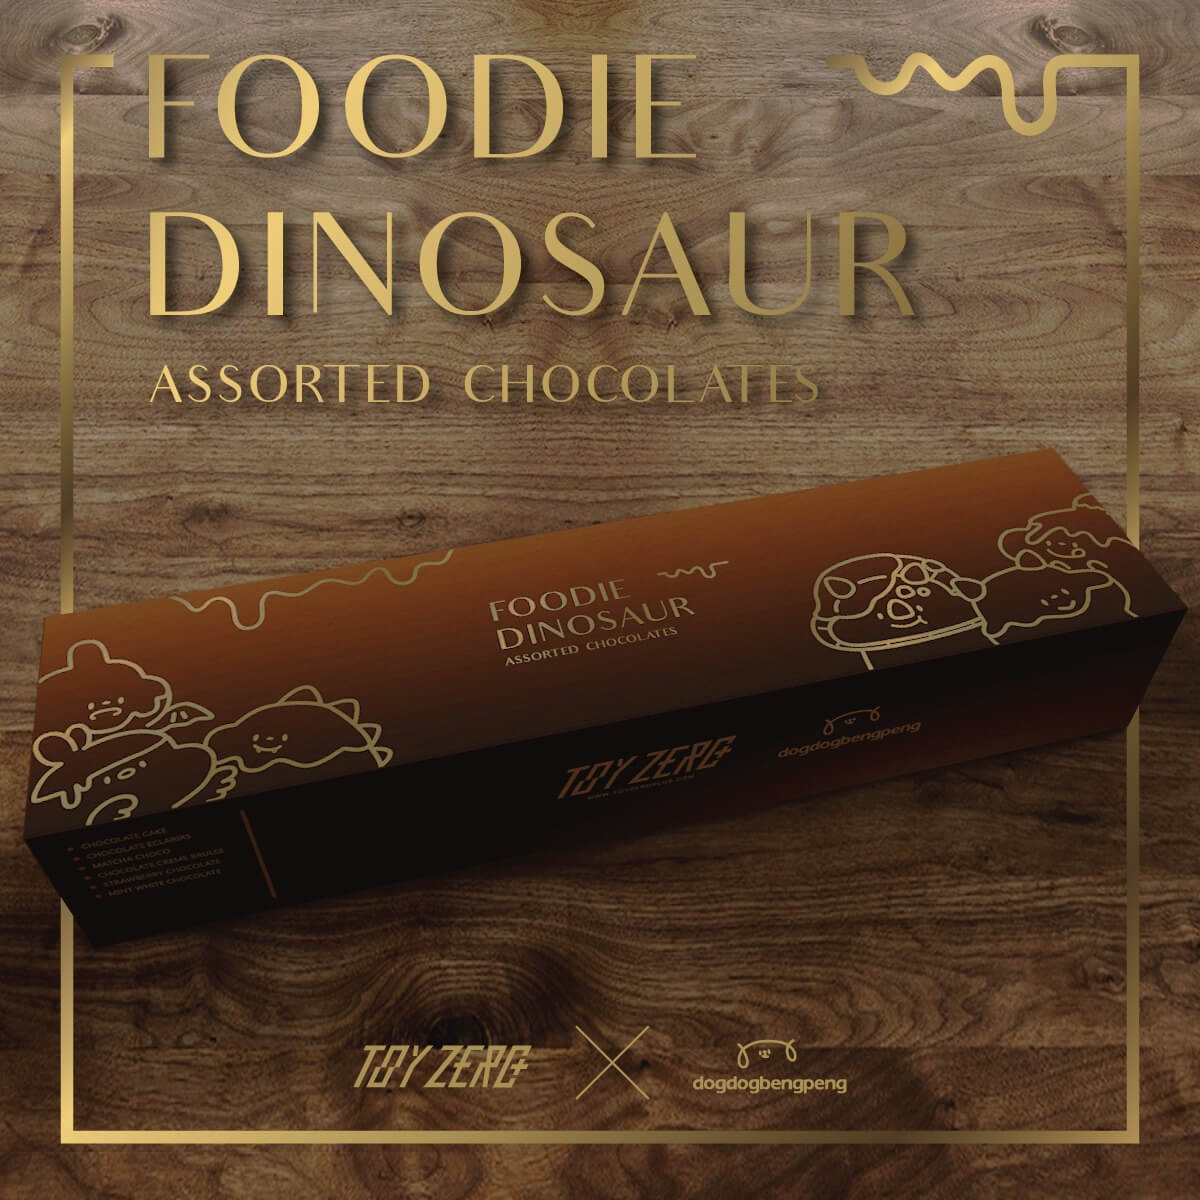 Foodie Dinosaur Assorted Chocolate Collection Box by Dogdogbengpeng